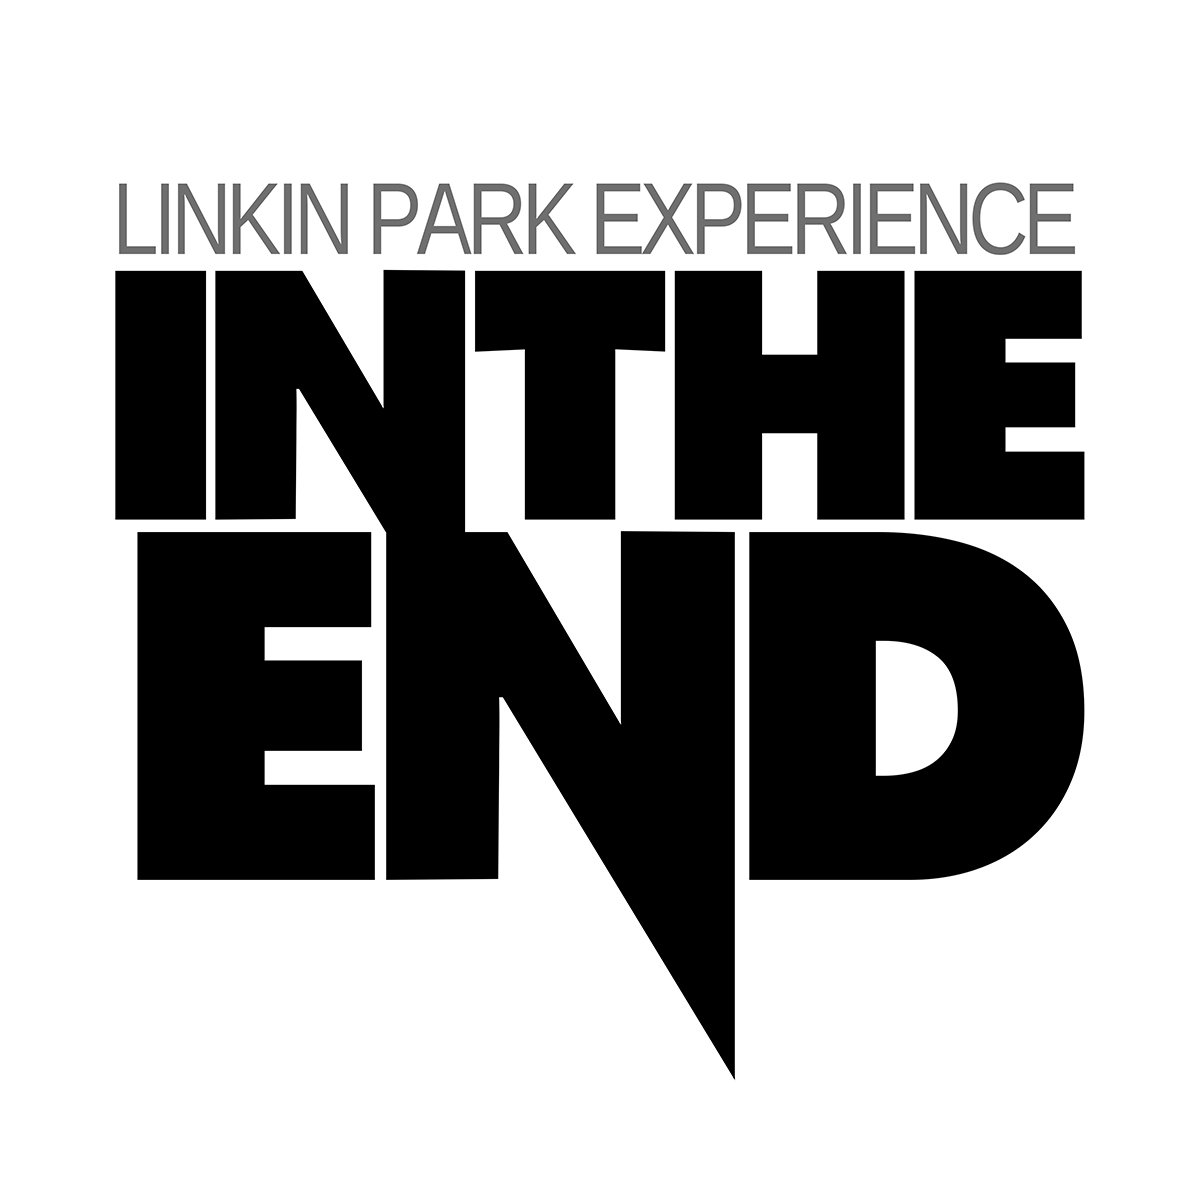 In The End - Linkin Park Experience